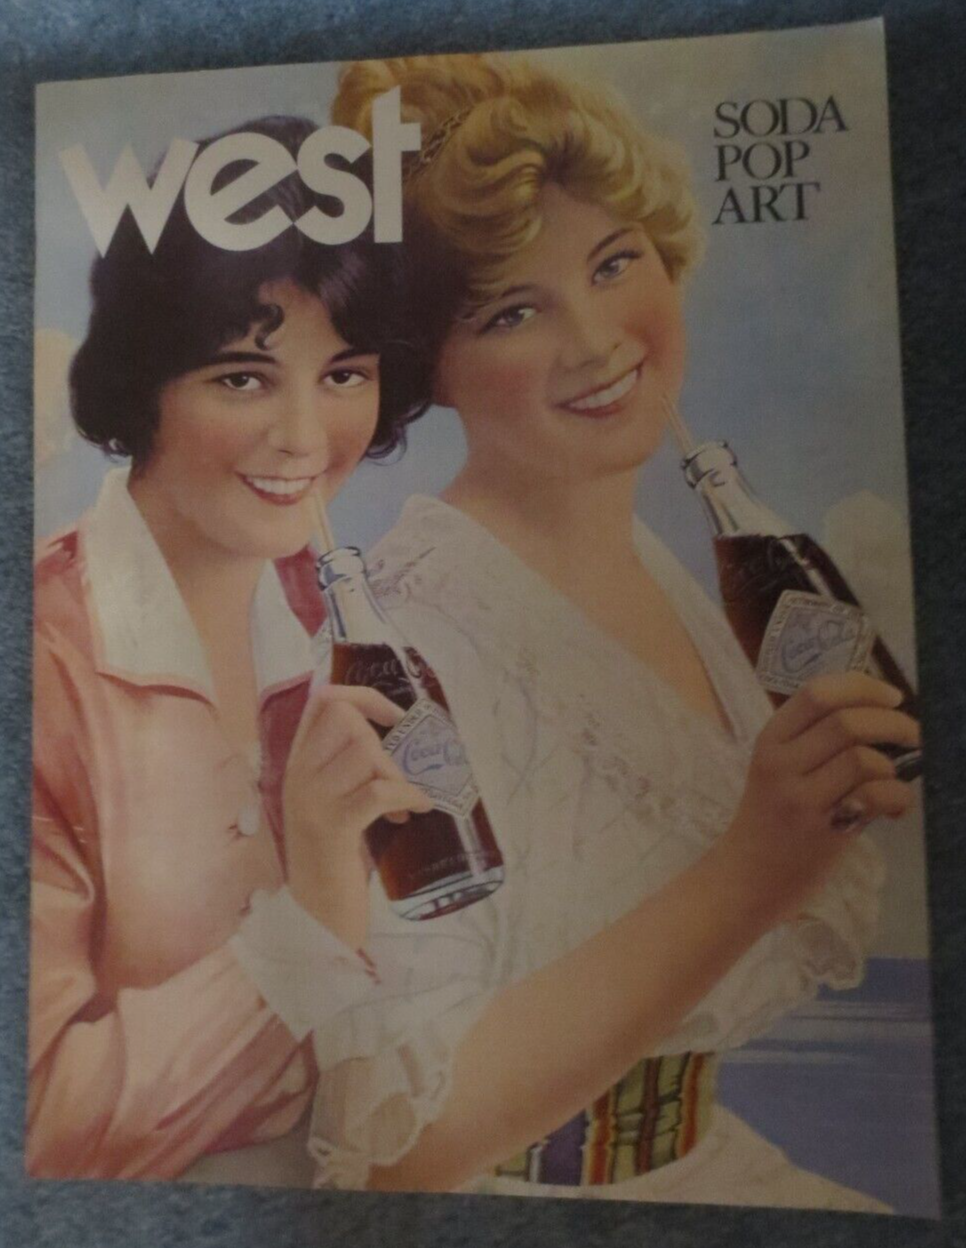 Primary image for WEST SODA POP ART BROCHURE 8 1/2 x 11 , 6 PAGES 3 PAGES OF Coca-Cola ART 1969